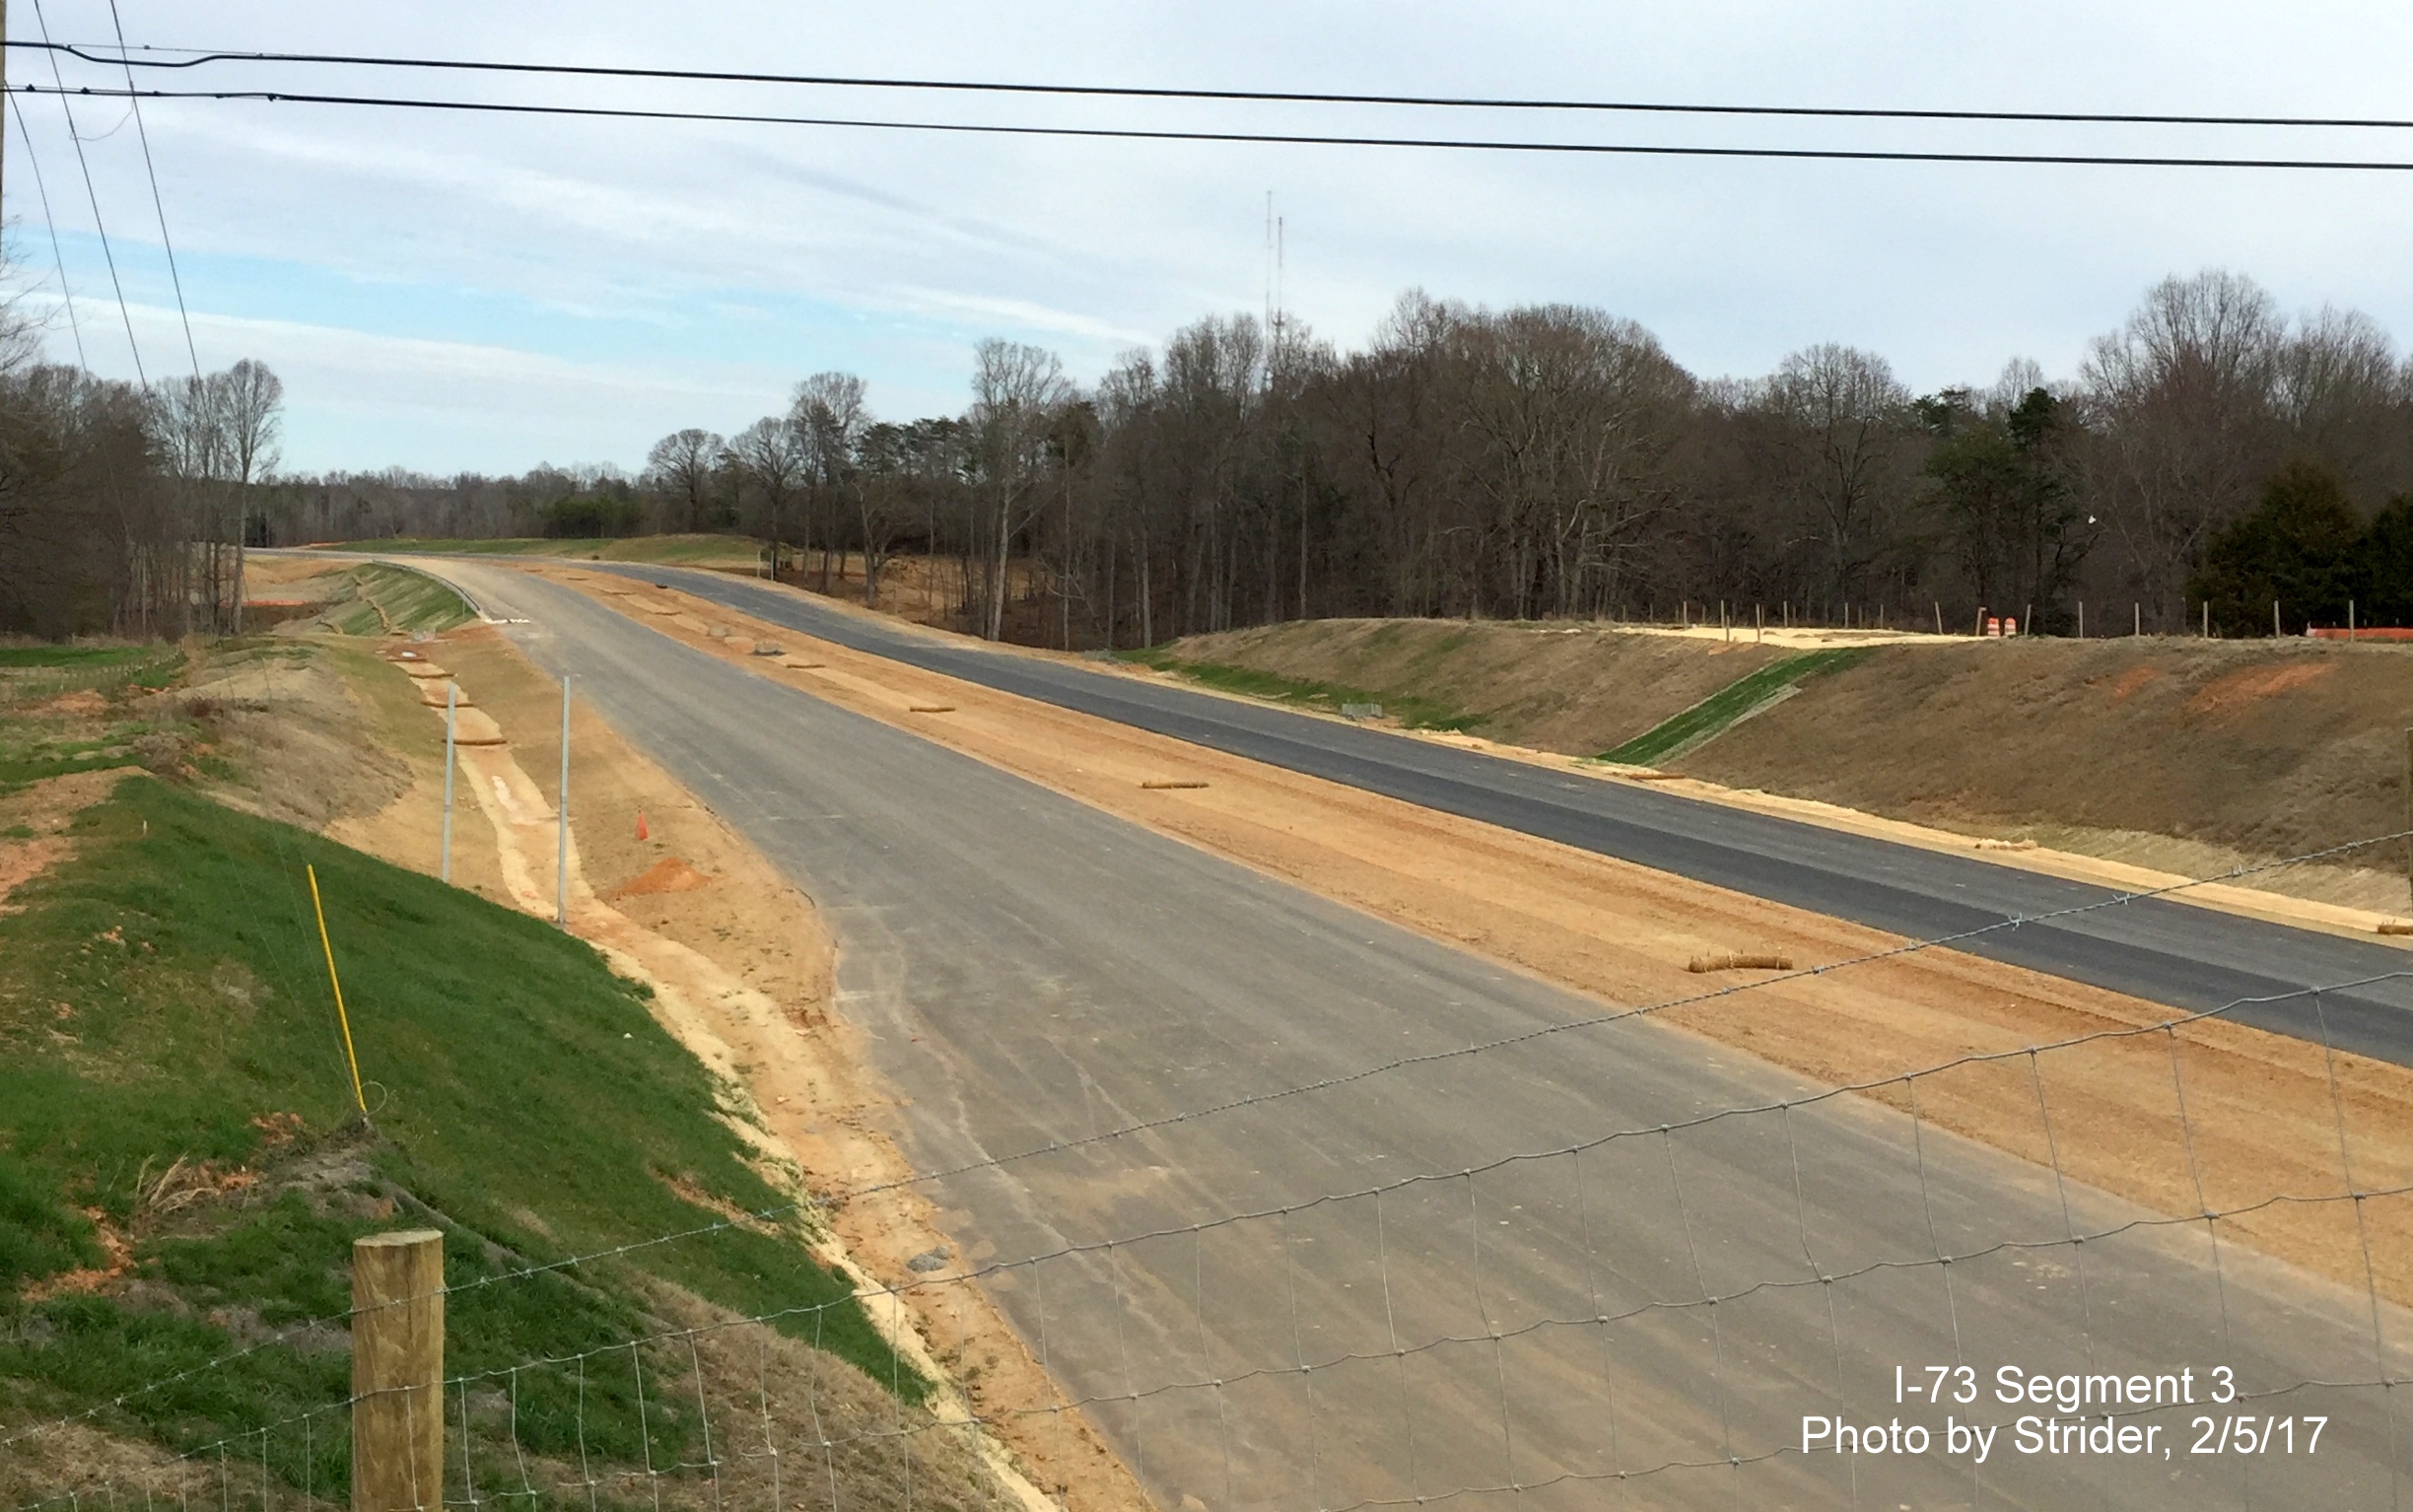 Image of view looking north from Deboe Rd showing progress paving future I-73 roadway, from Strider